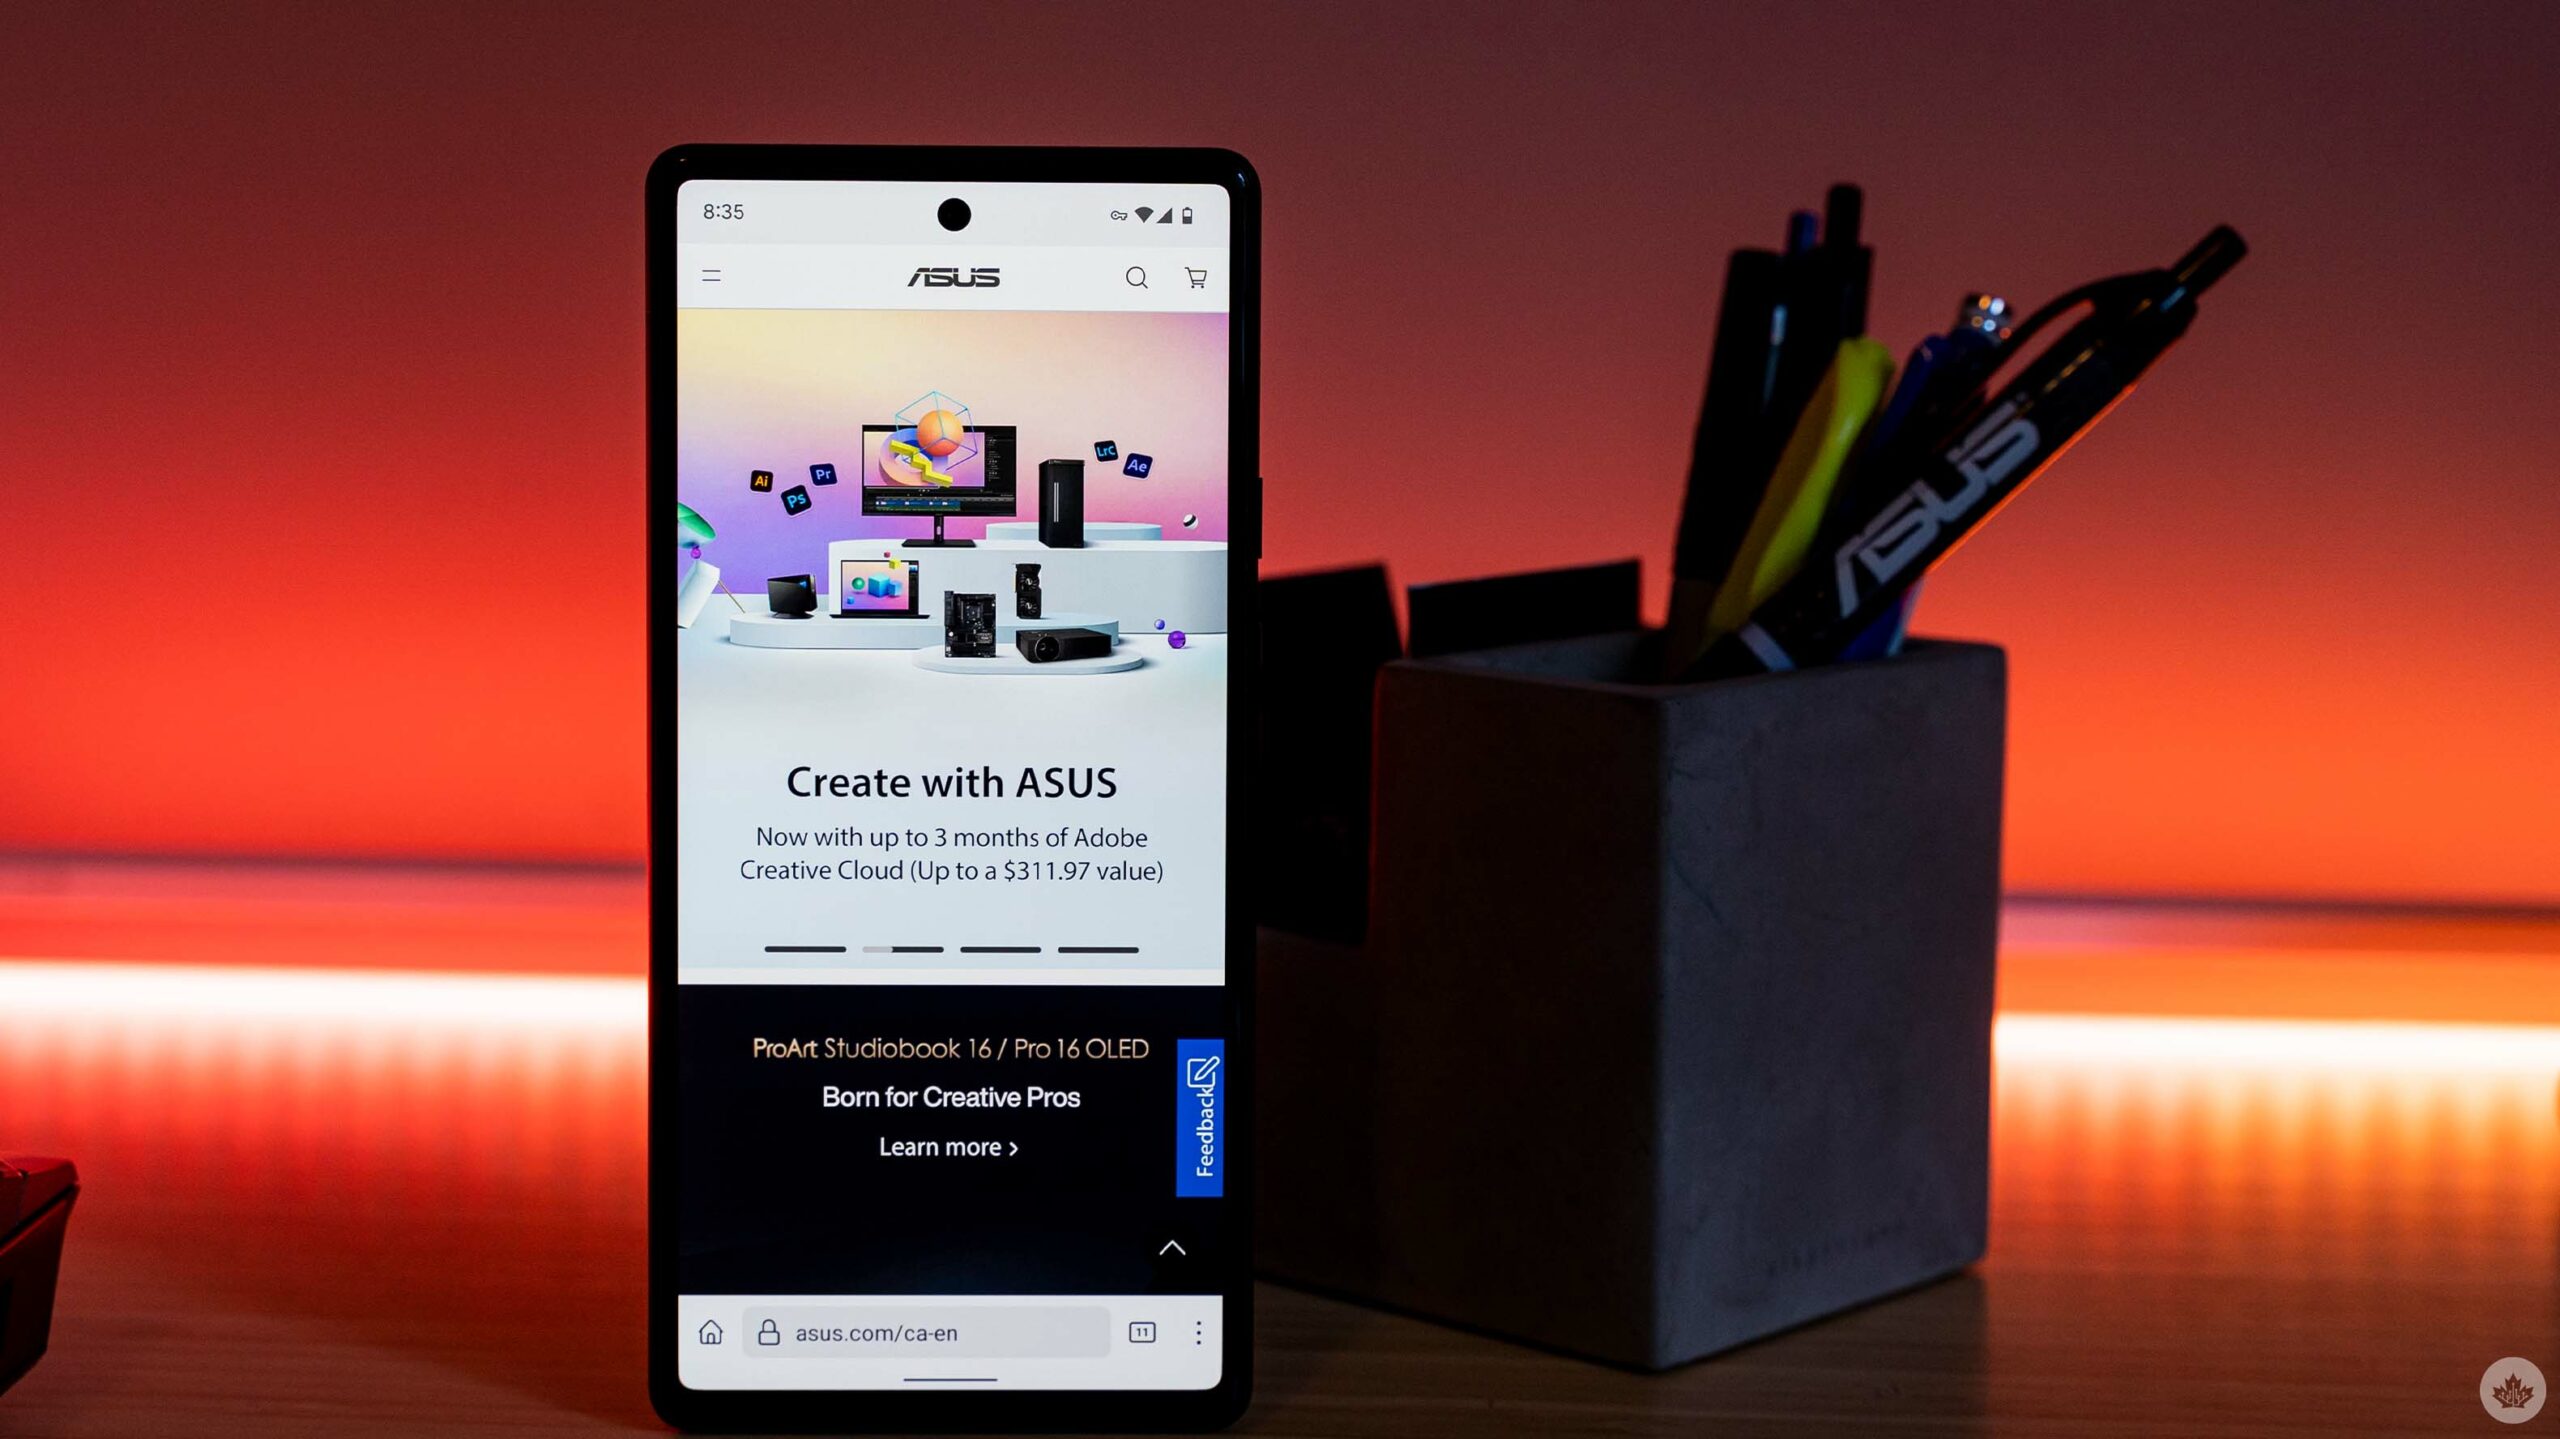 Asus website on a smartphone